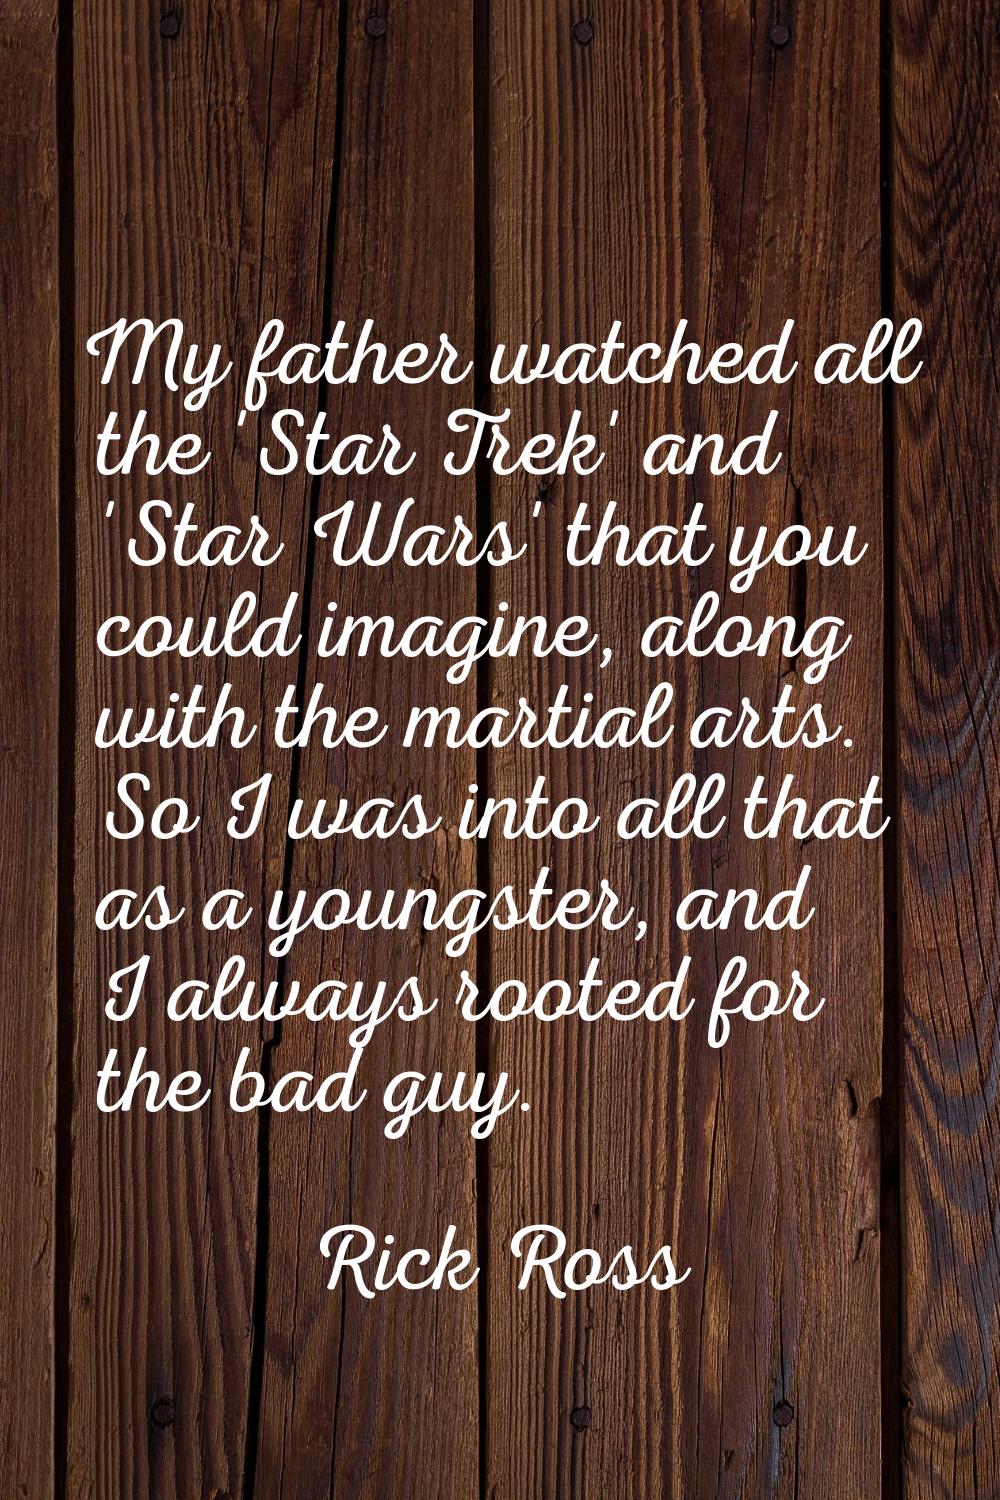 My father watched all the 'Star Trek' and 'Star Wars' that you could imagine, along with the martia